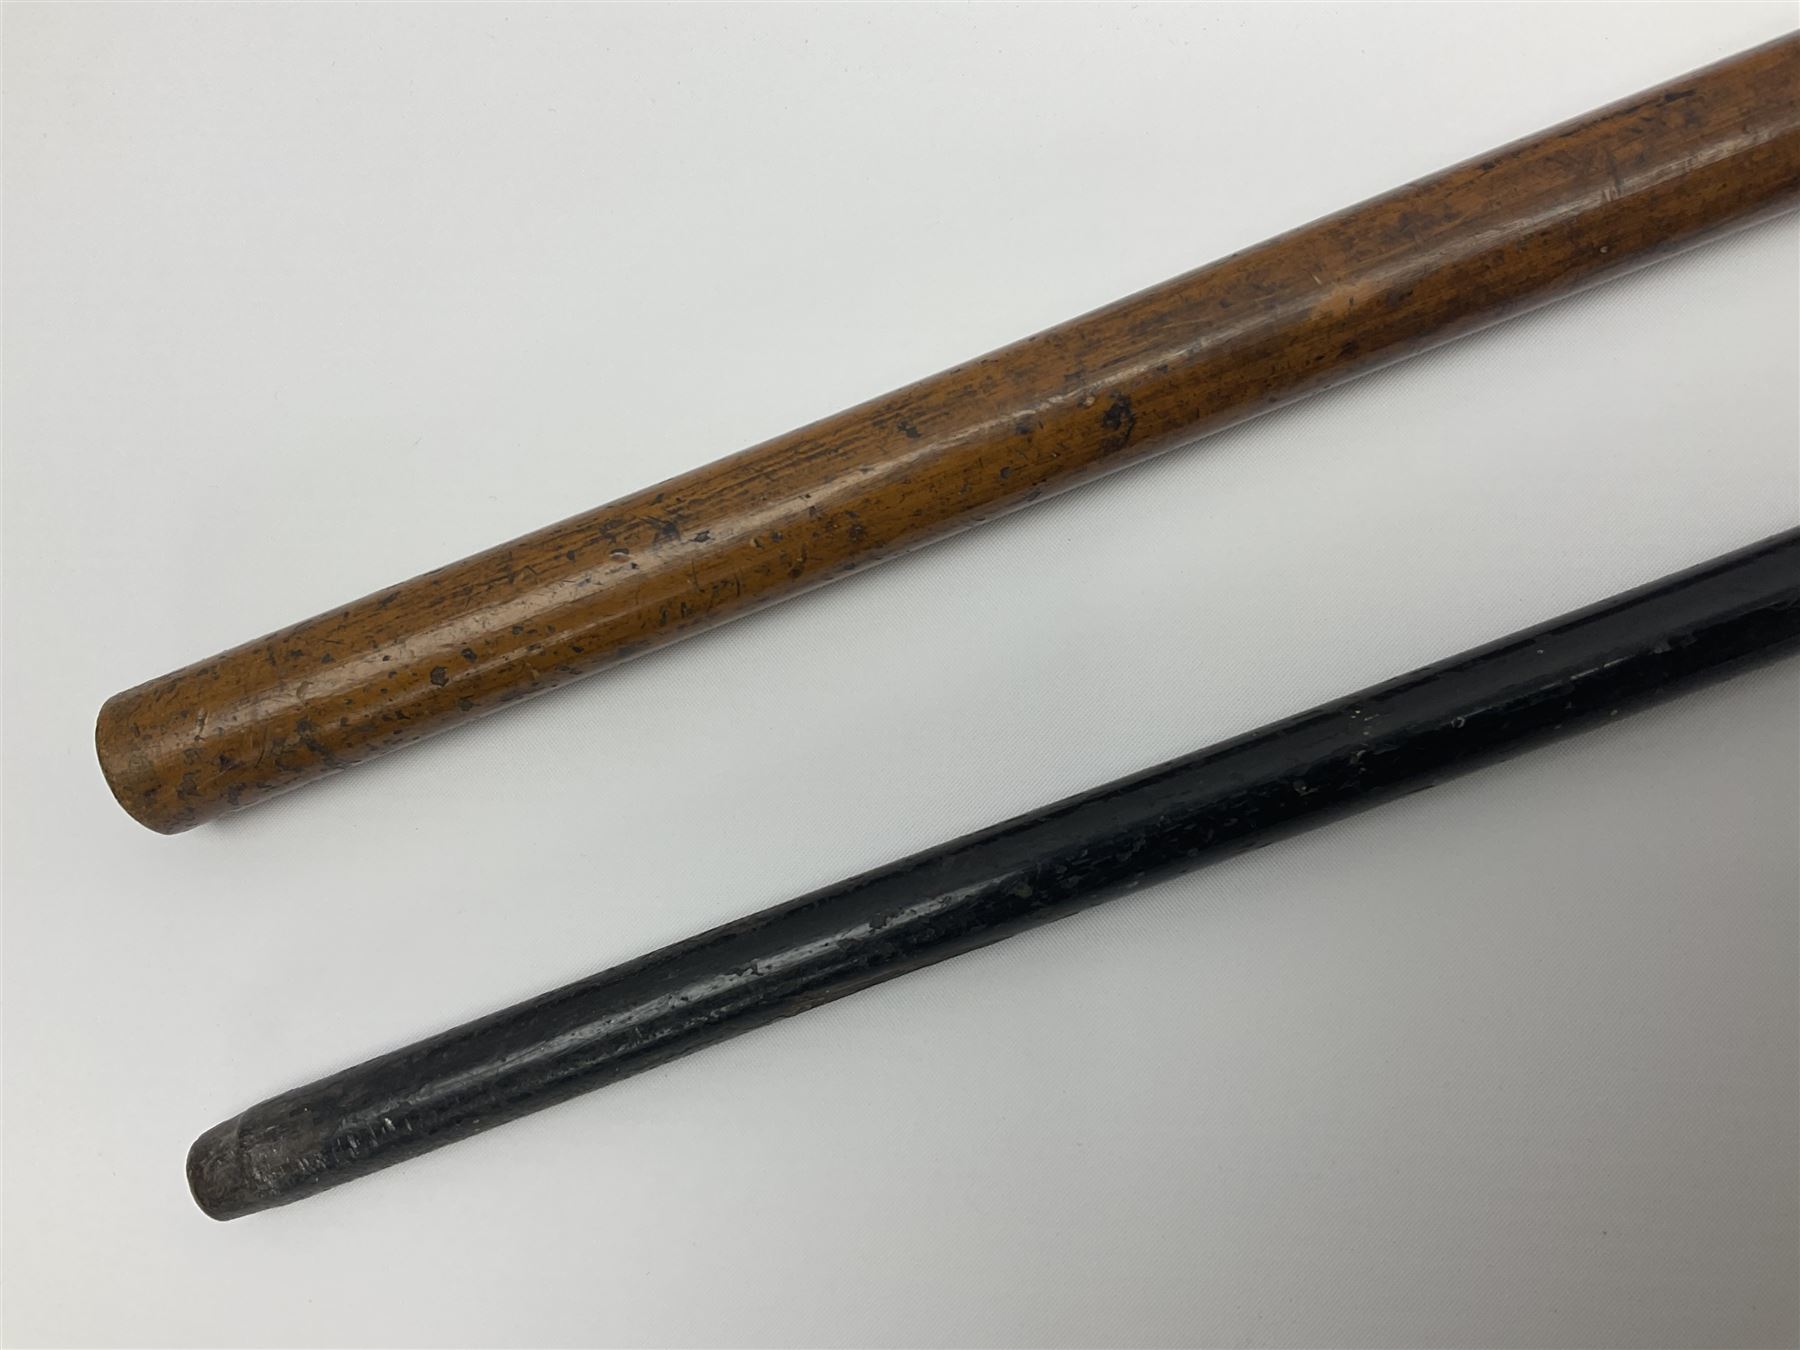 Malacca walking cane mounted with continental silver cap - Image 15 of 16